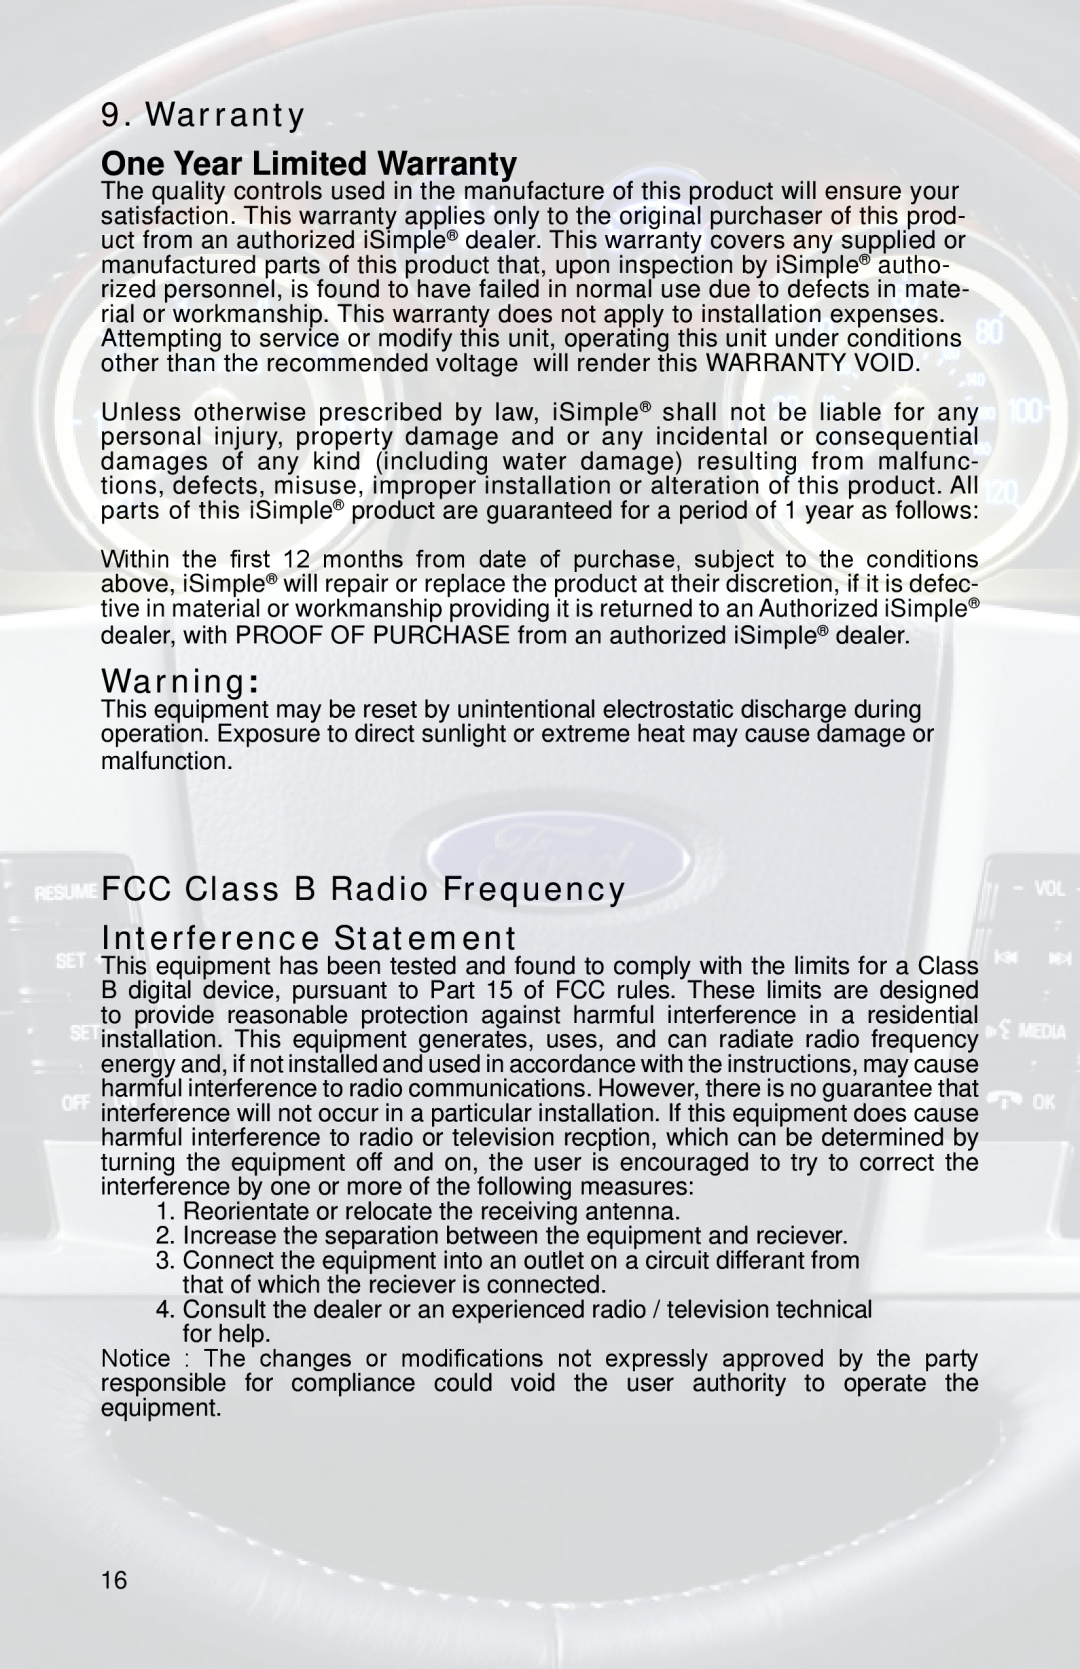 iSimple PGHFD1 owner manual Warranty One Year Limited Warranty, FCC Class B Radio Frequency, Interference Statement 